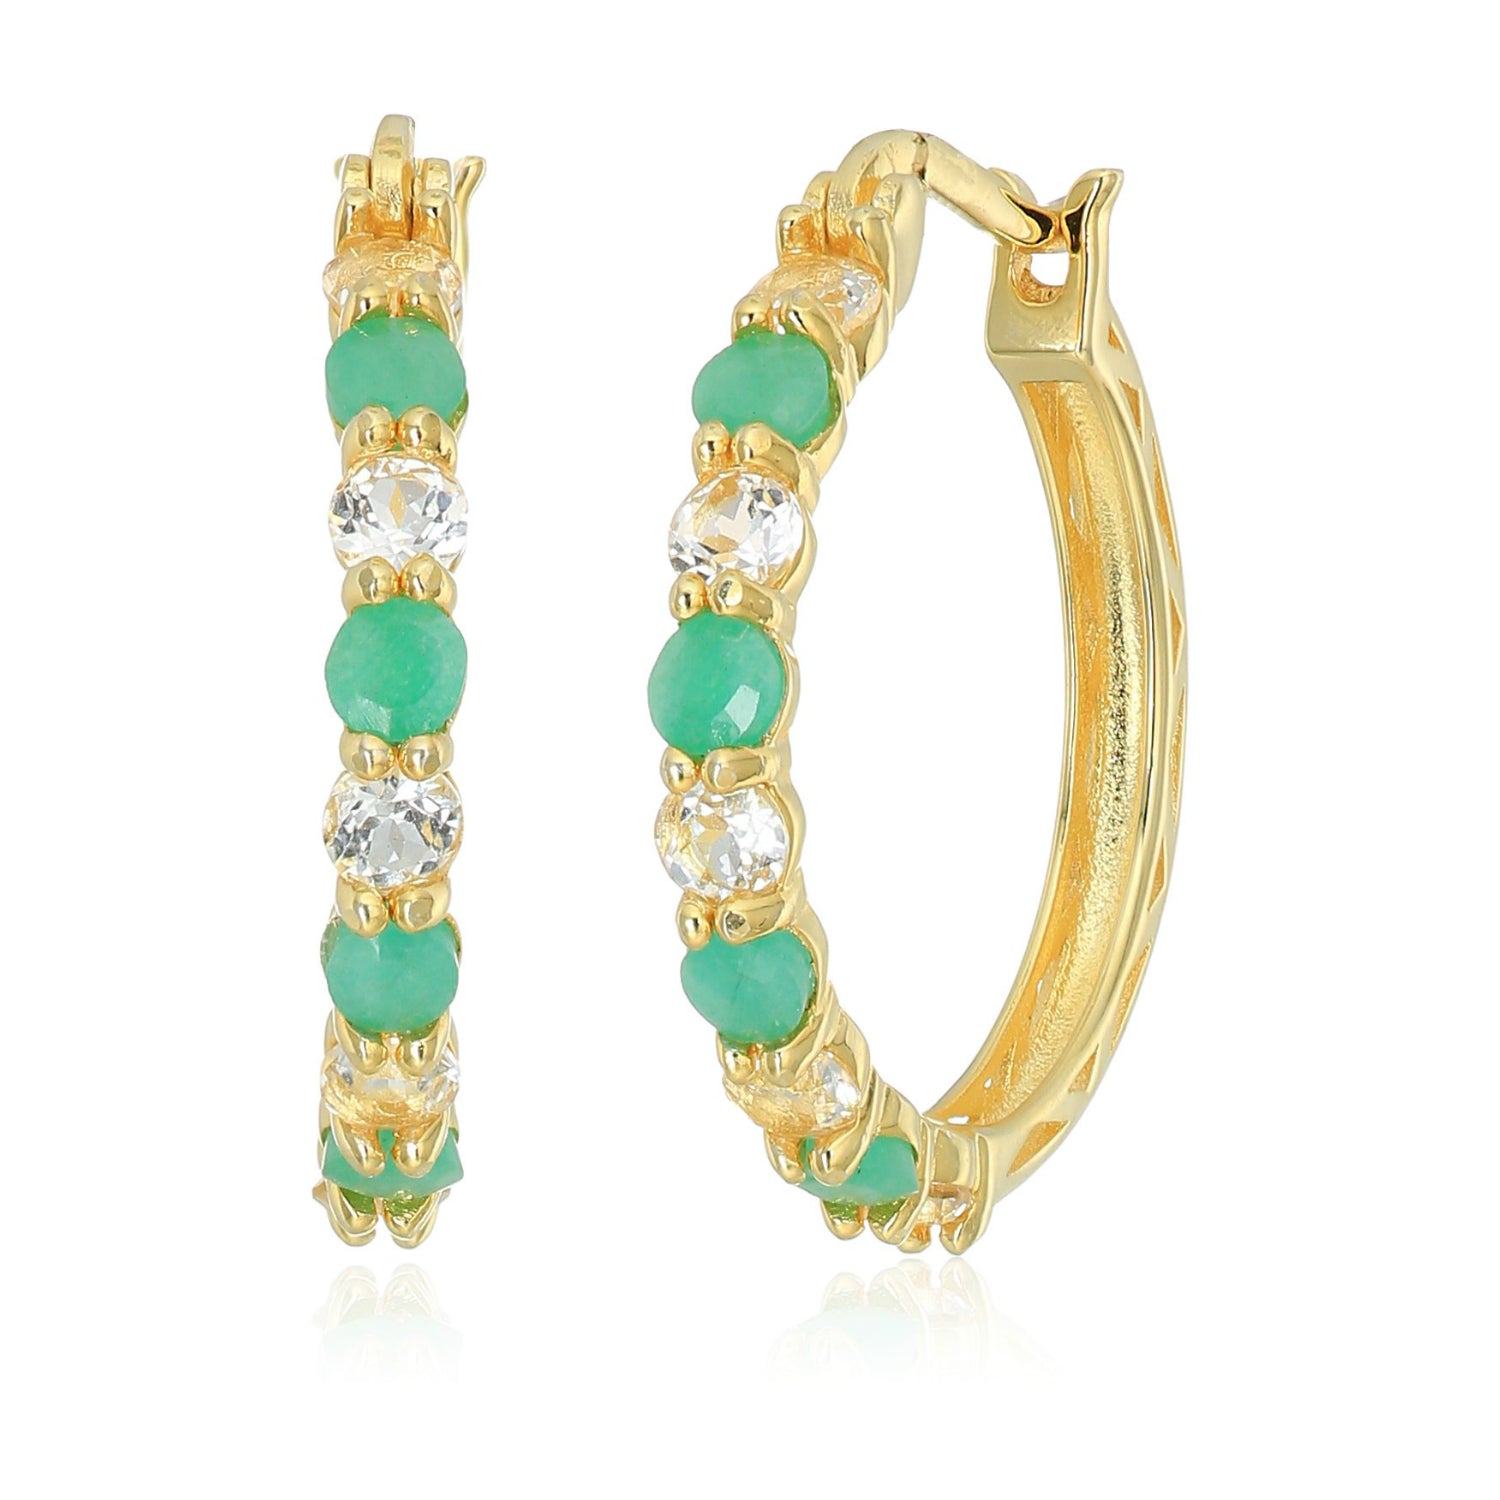 Pinctore Yellow Gold-Plated Silver 2 cttw Emerald and White Topaz Hoop Earrings, 1" - pinctore